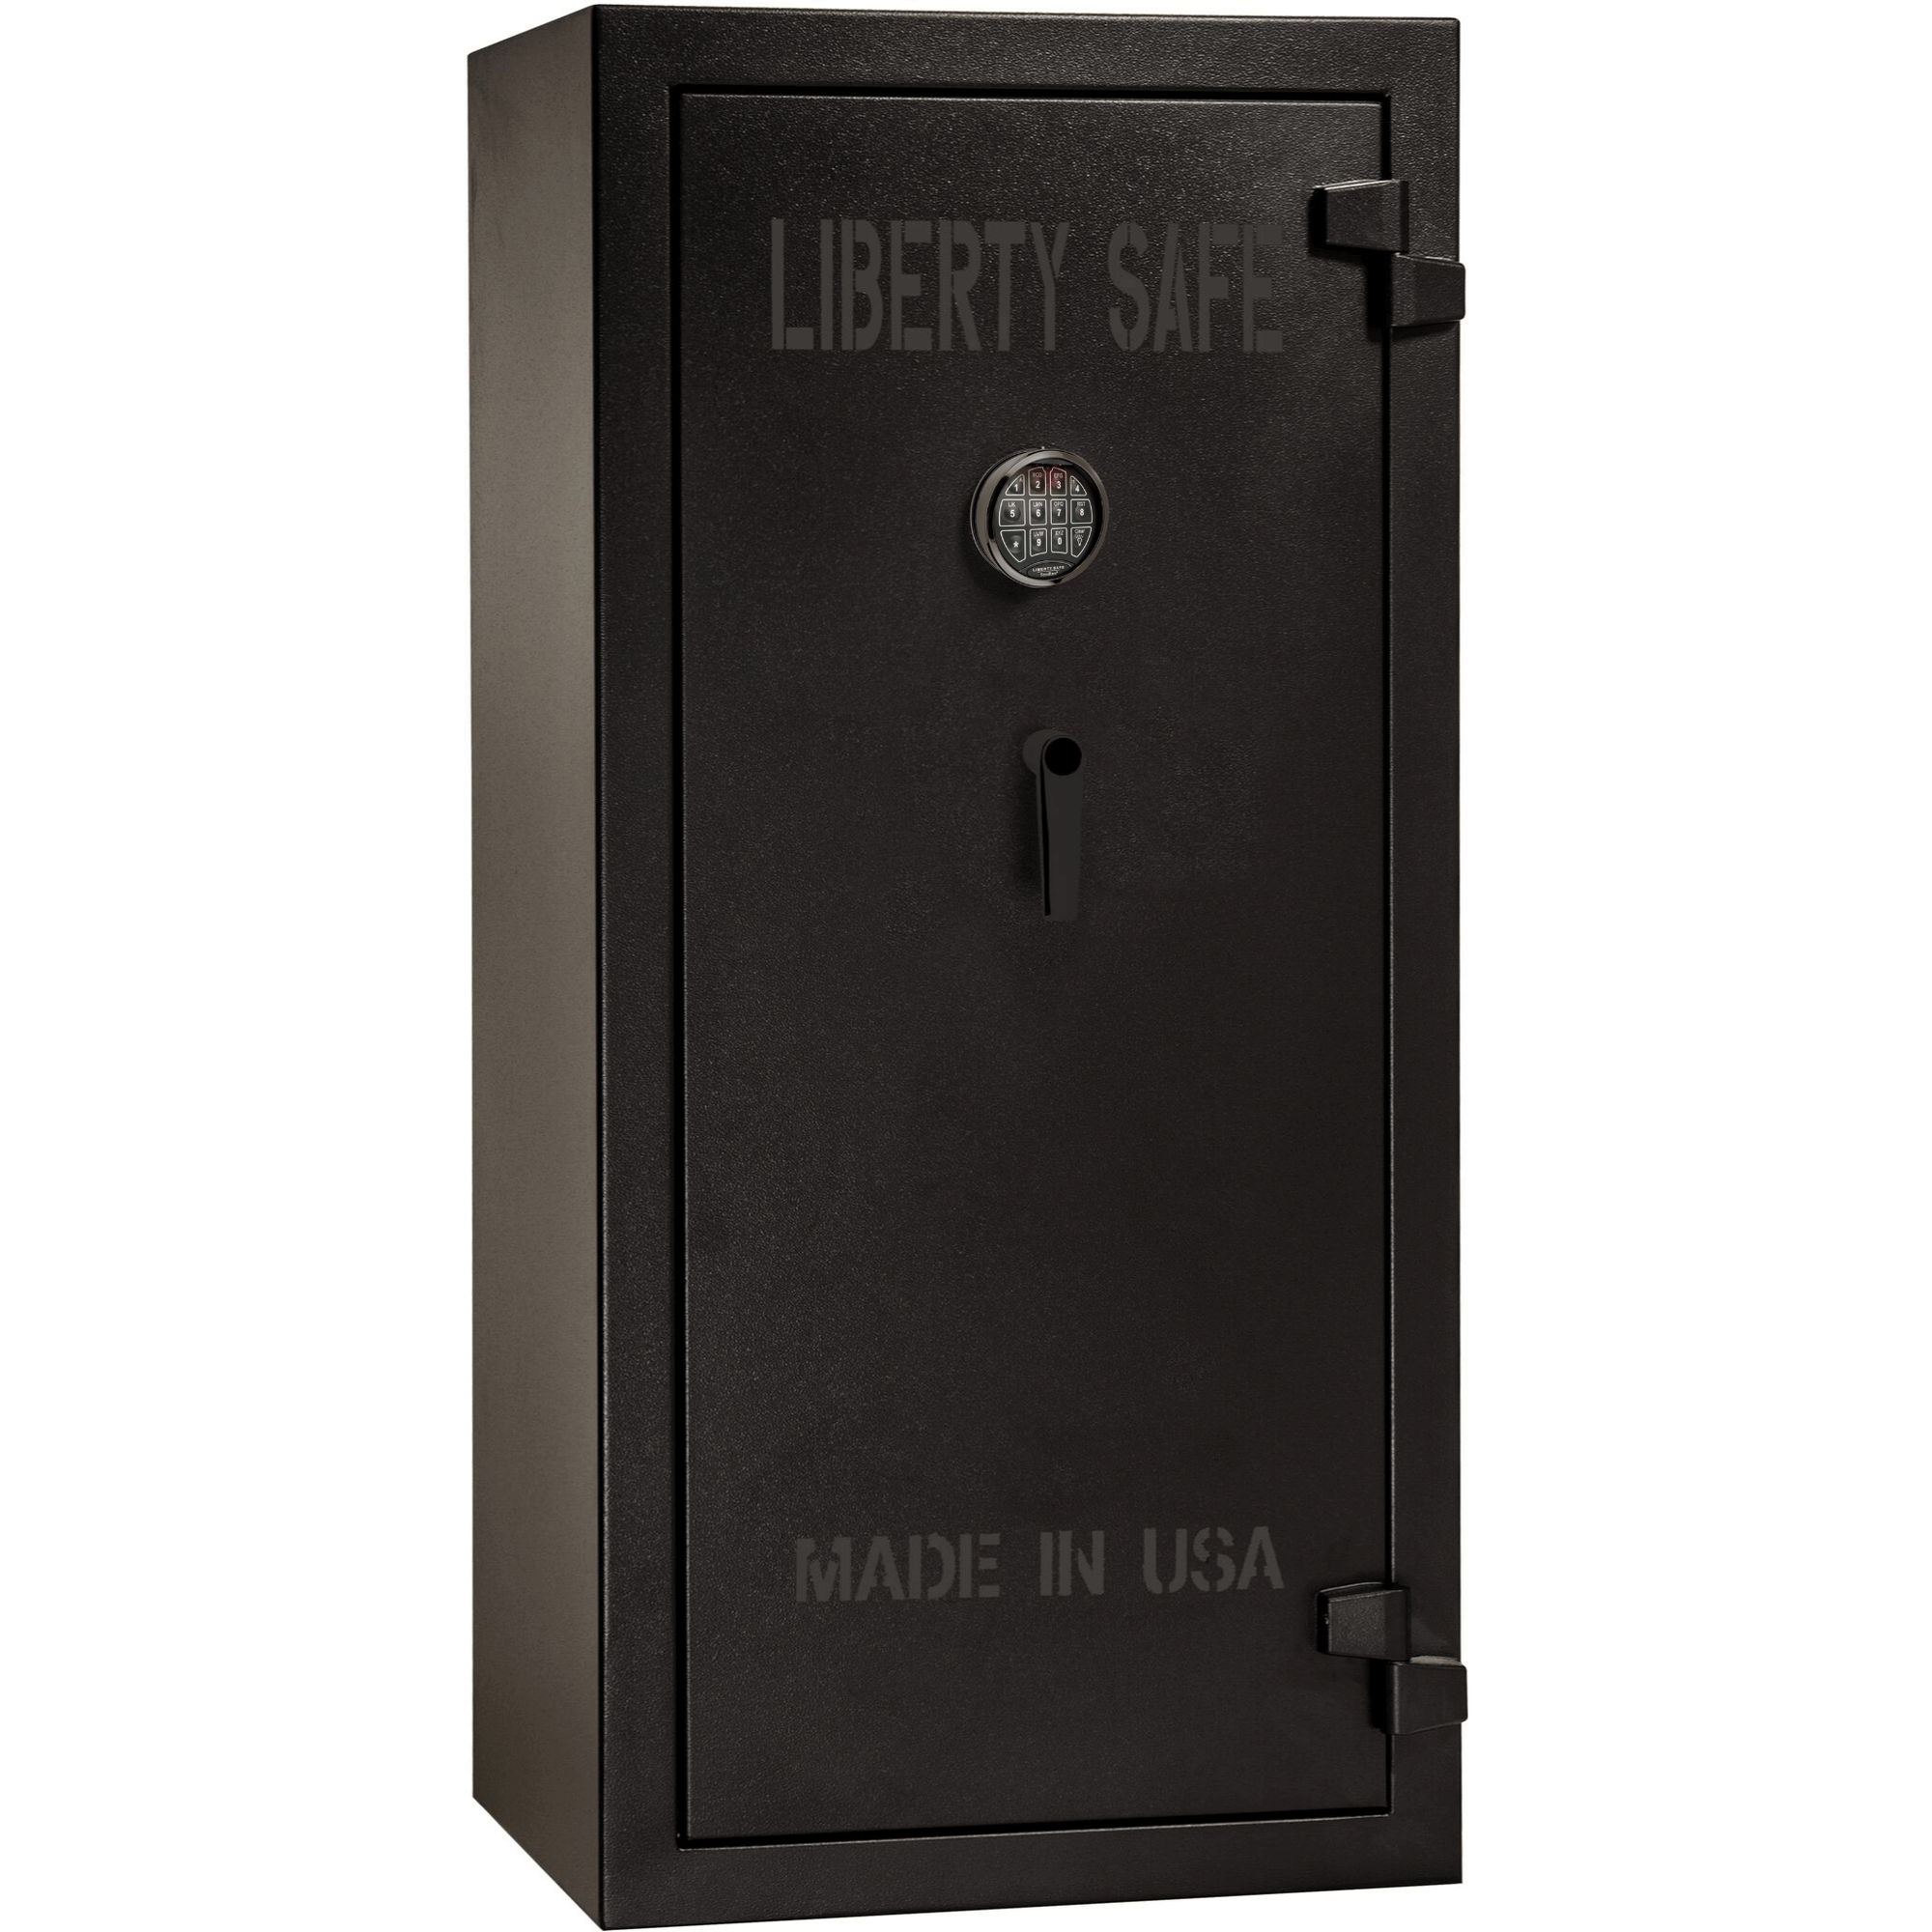 Tactical | 24 | 40 Minute Fire Protection | Black | Black Mechanical Lock | 59.5"(H) x 28.25"(W) x 22"(D) | Liberty Safe Norcal.